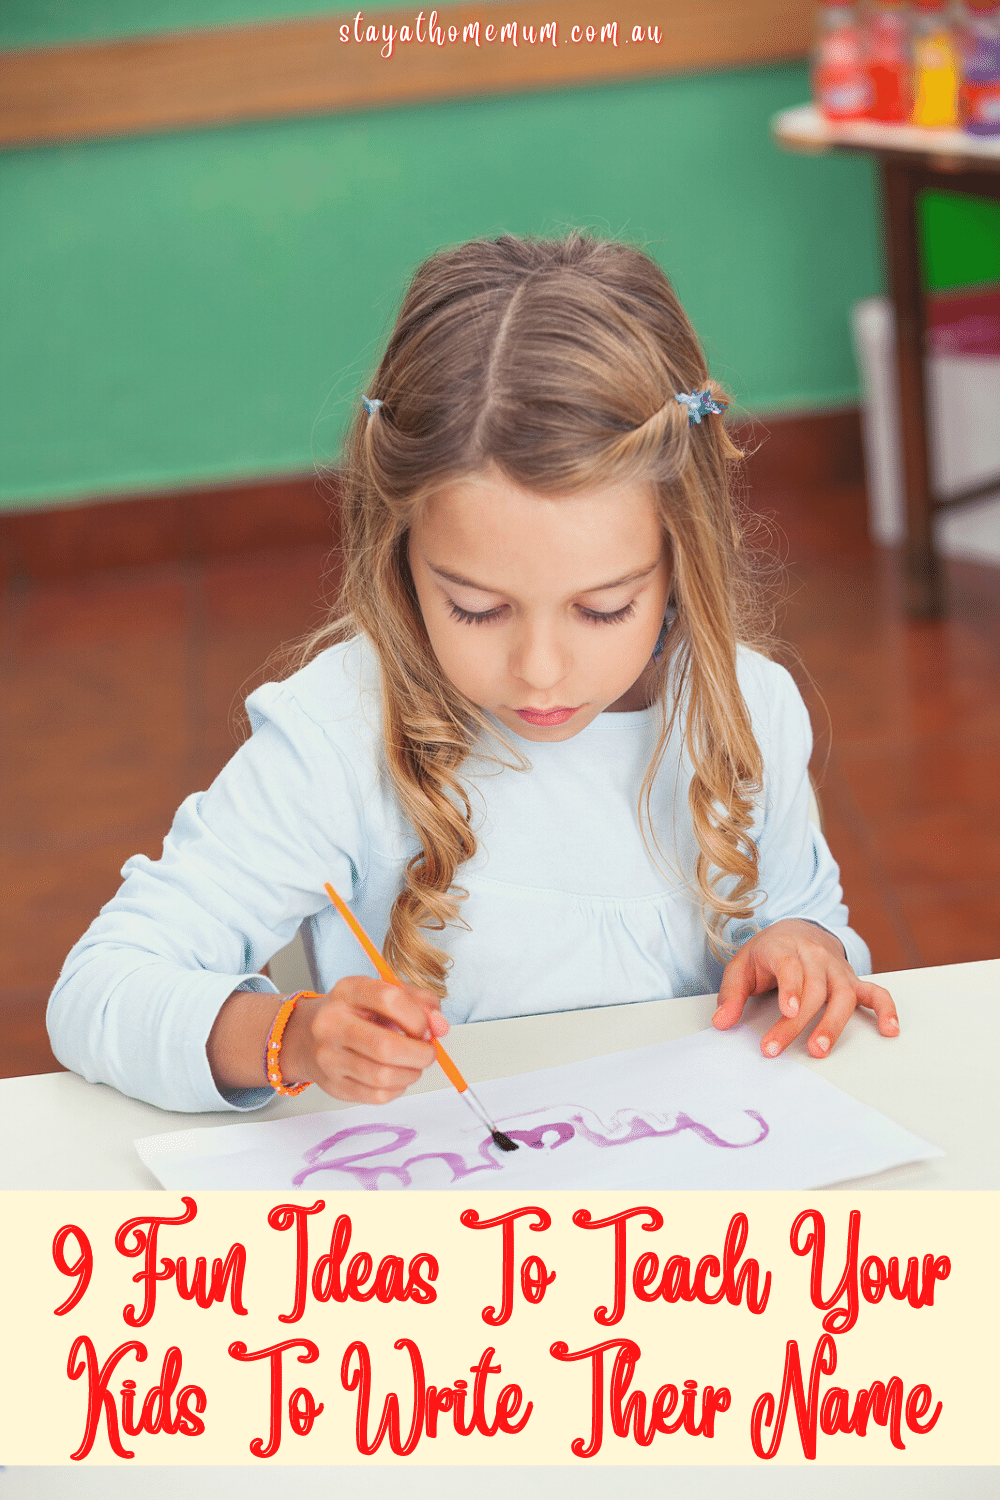 9 Fun Ideas To Teach Your Kids To Write Their Name | Stay At Home Mum